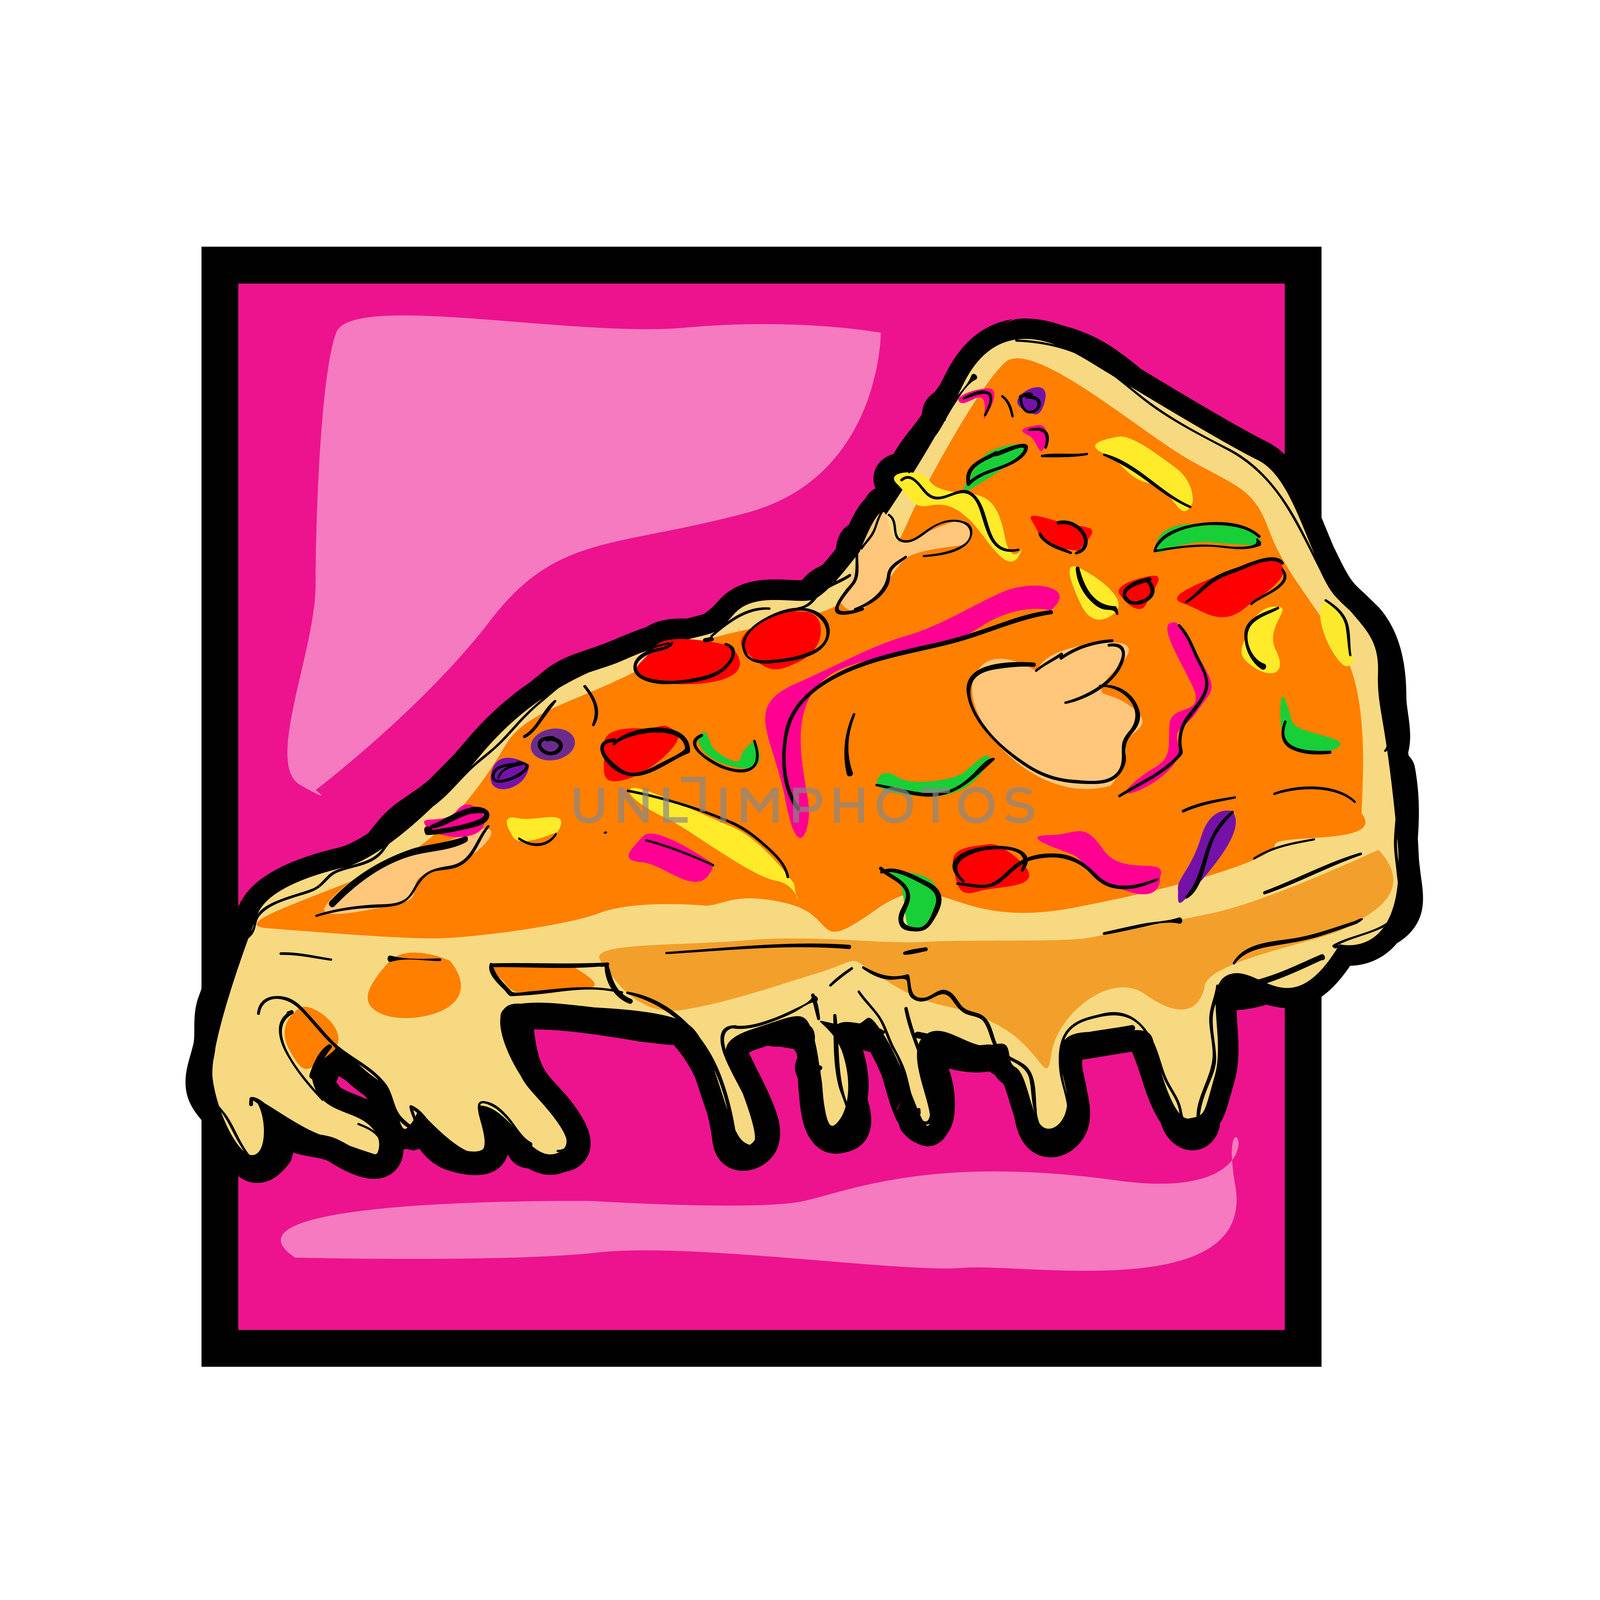 Clip art pizza slice icon by catacos